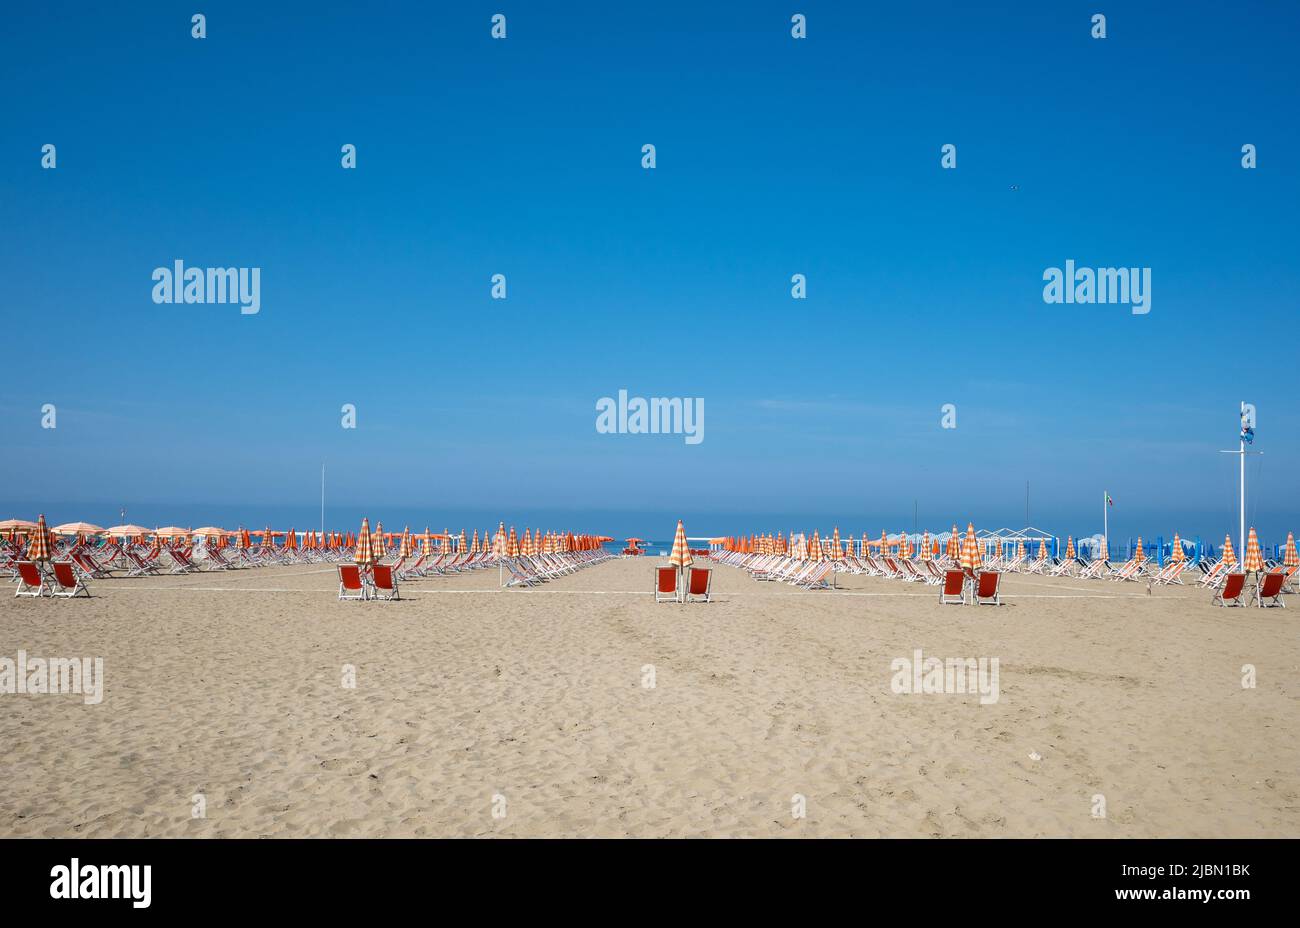 A view of red beach deck chairswith orange and white umbrellas on a sunny day with a clear blue sky. Stock Photo